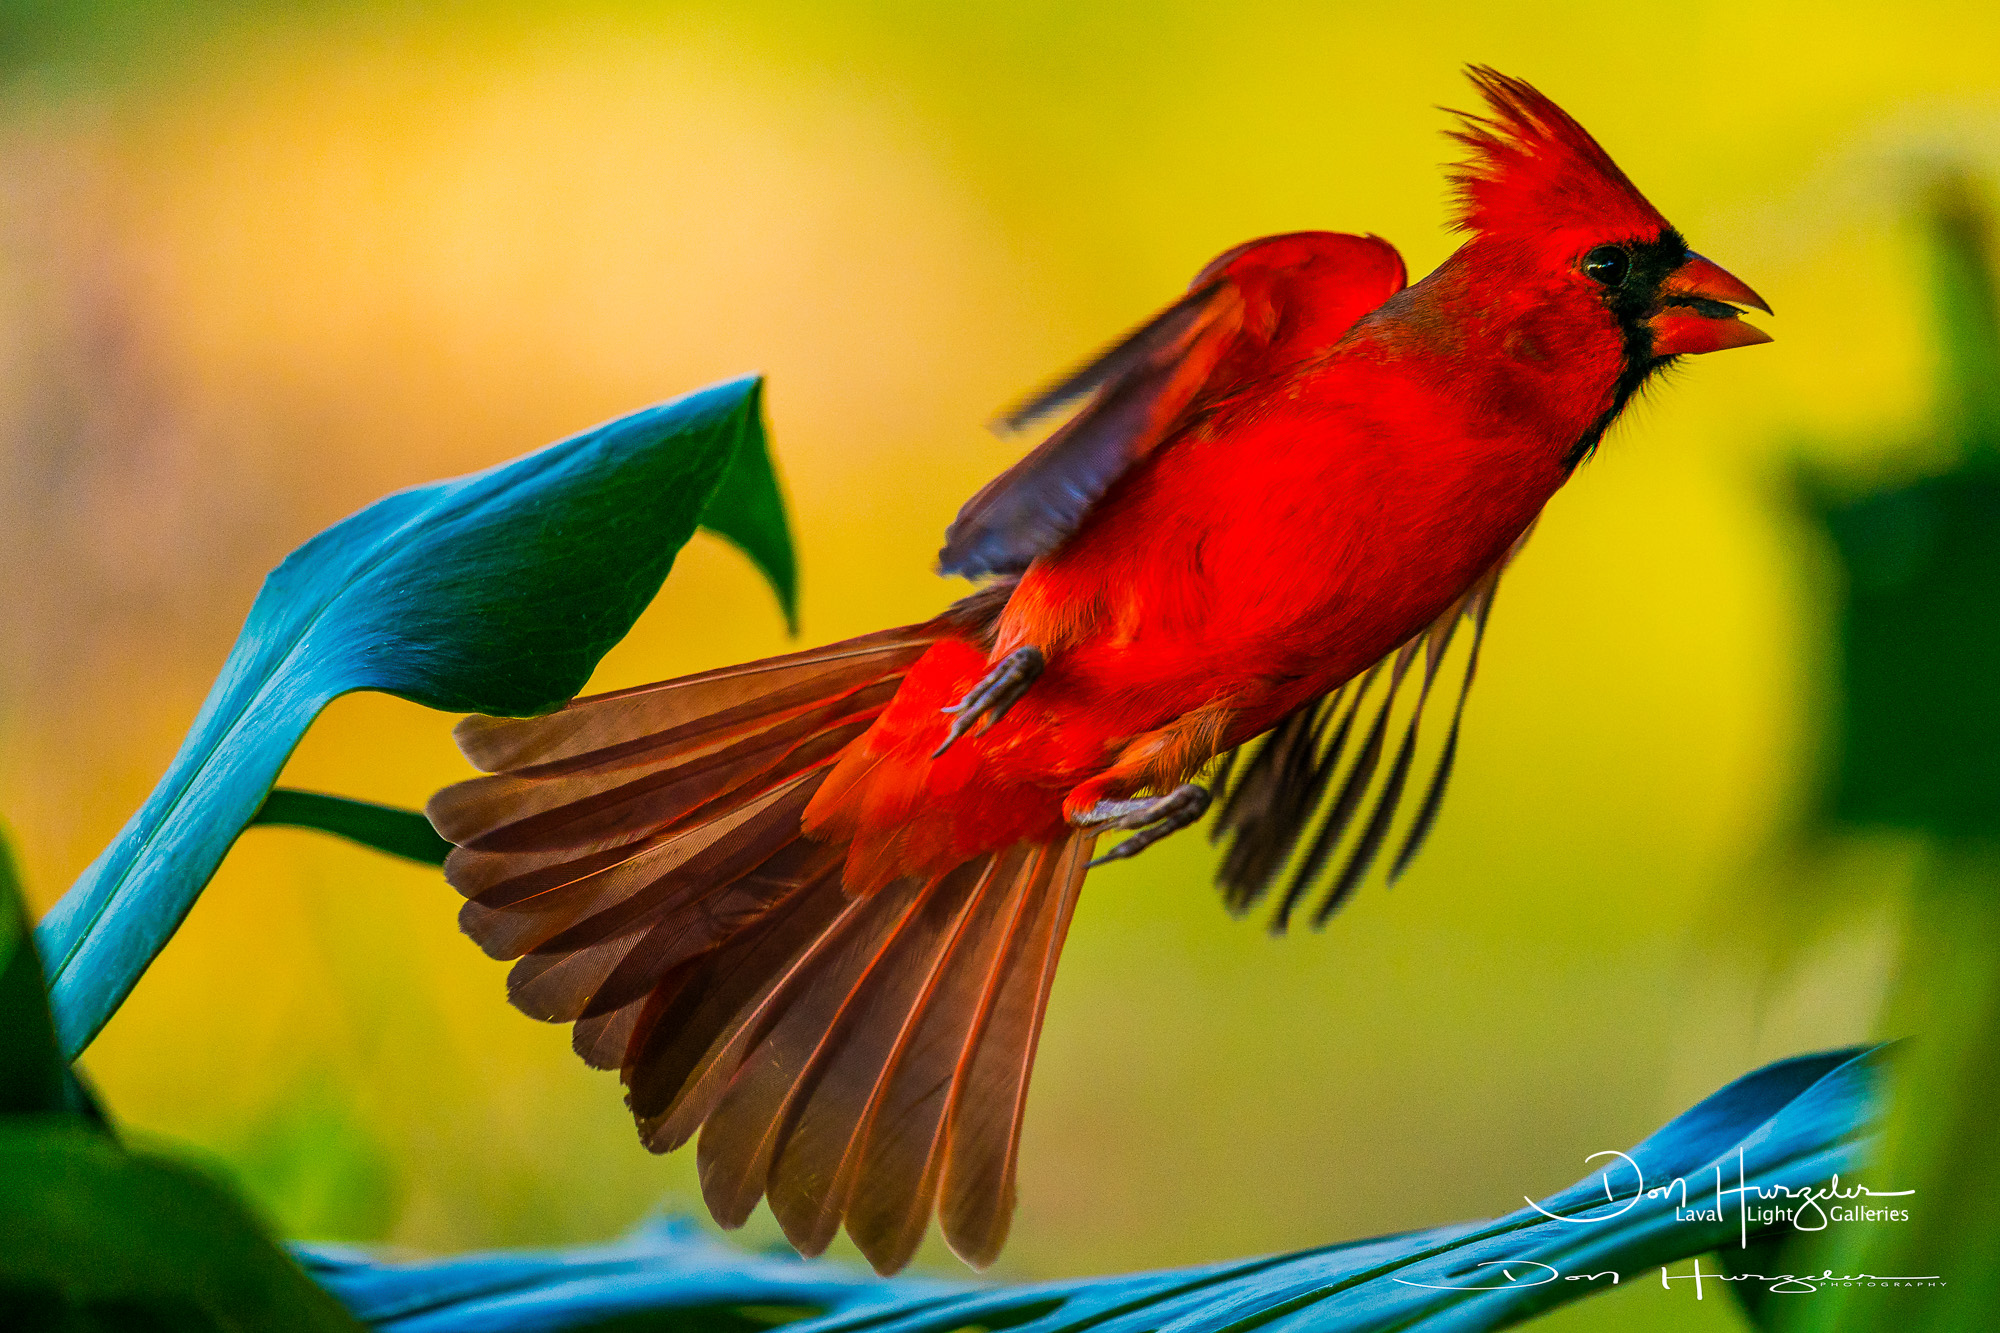 Northern Cardinal...mid Pacific.